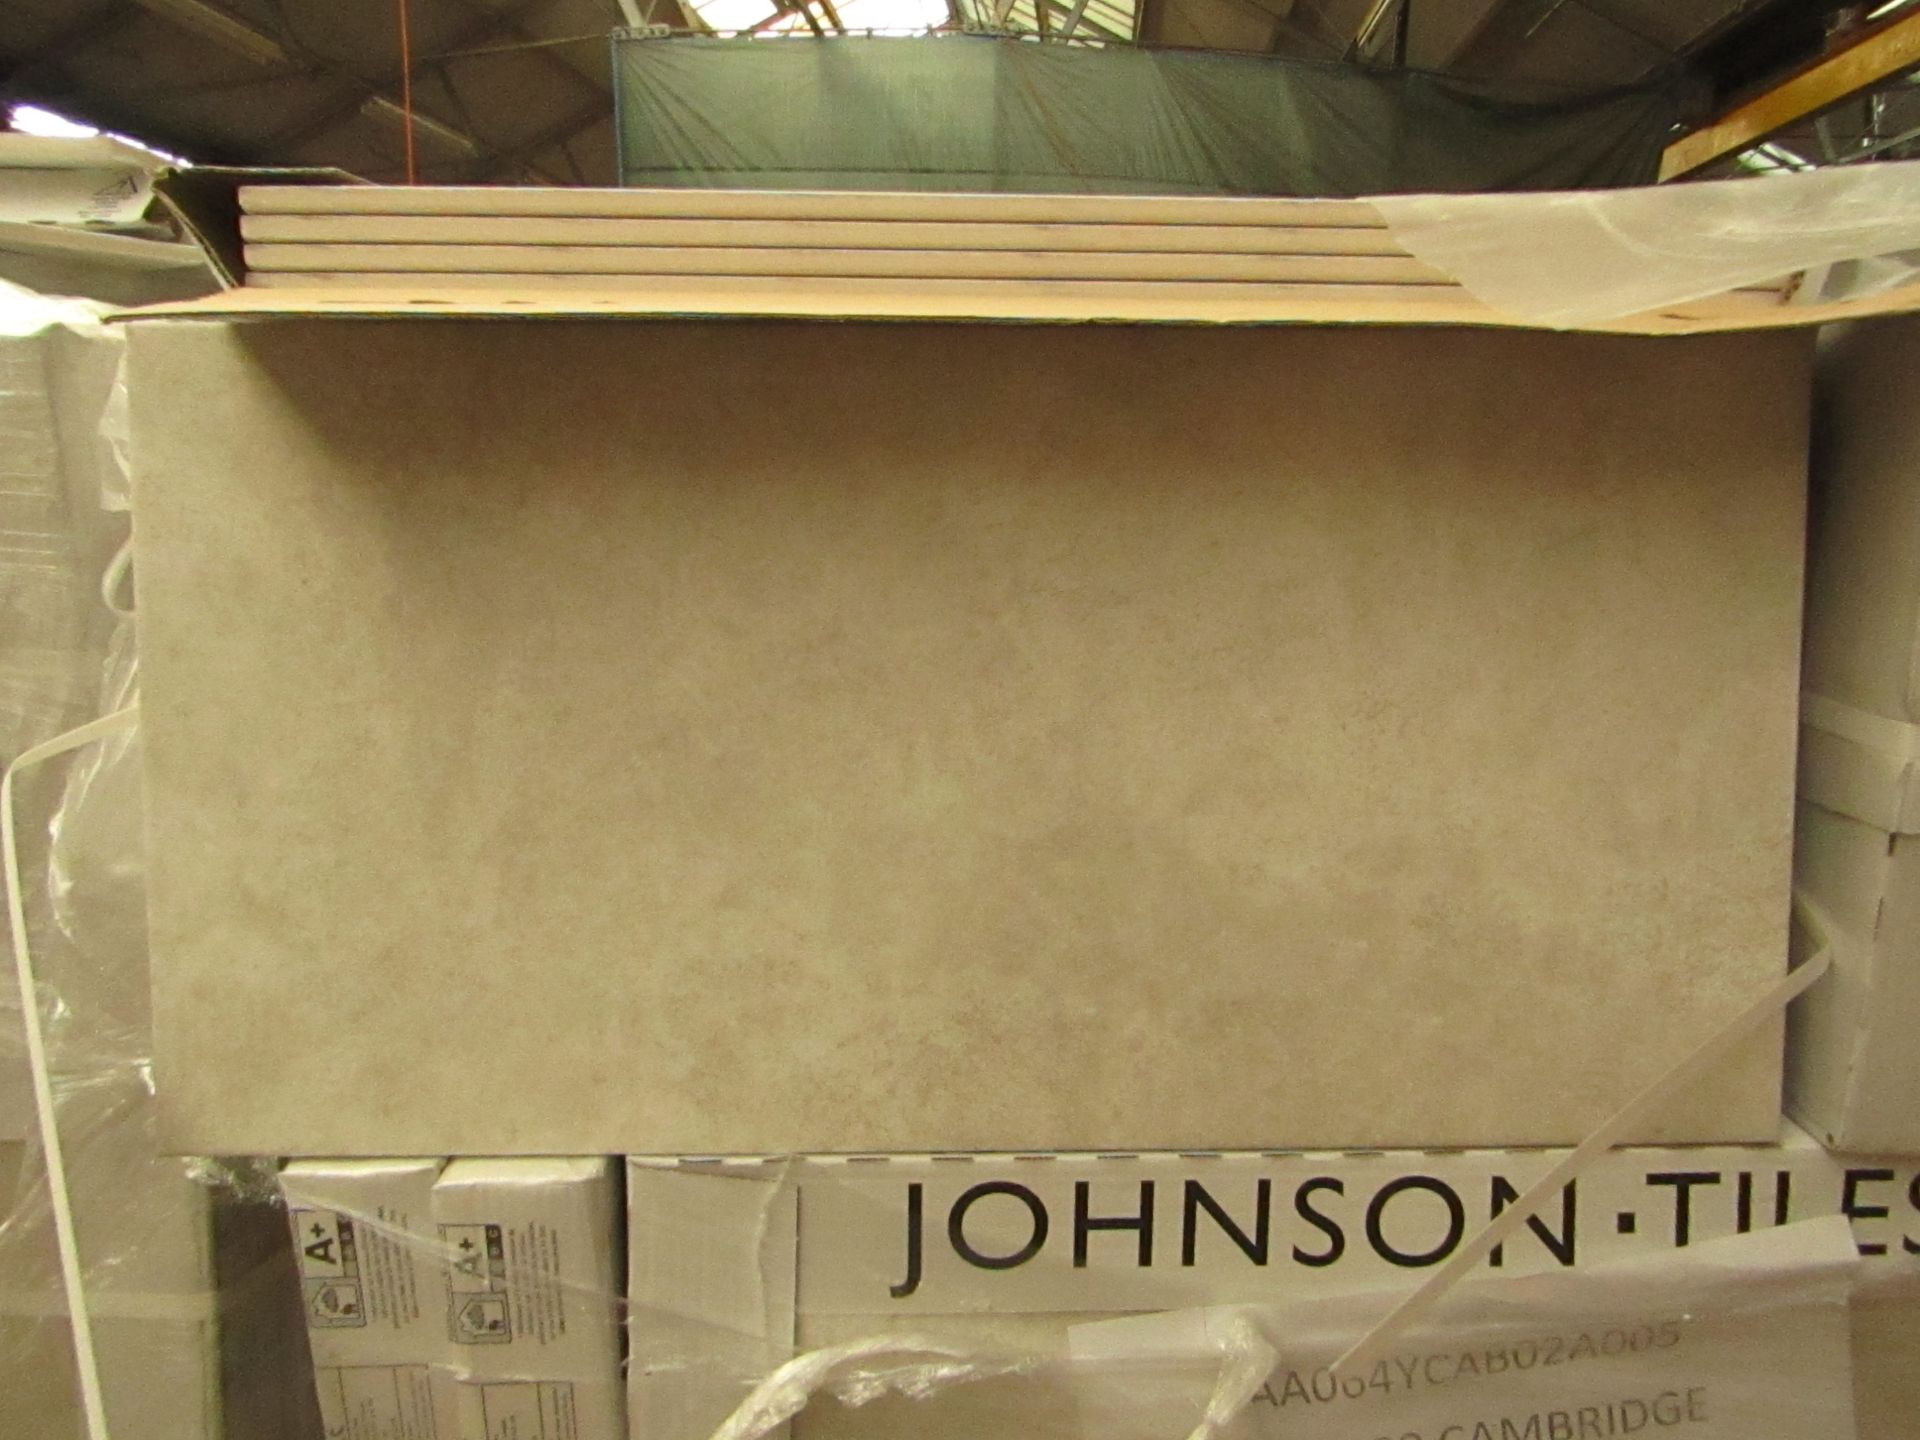 10x Packs of 5 Classic White Textured 300x600 wall and Floor Tiles By Johnsons, New, the RRP per